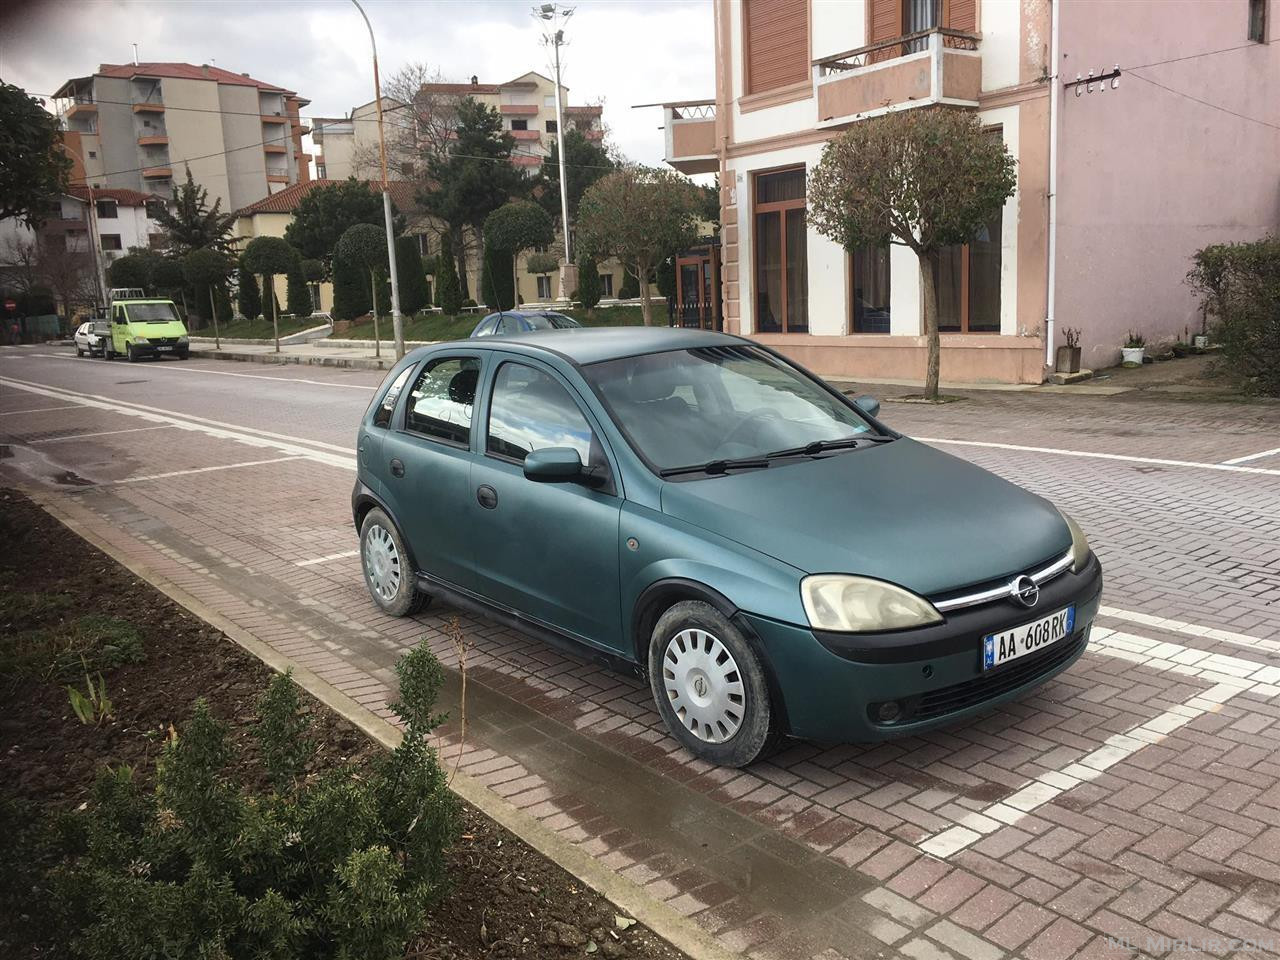 Shes opel corsa 1.7 nafte